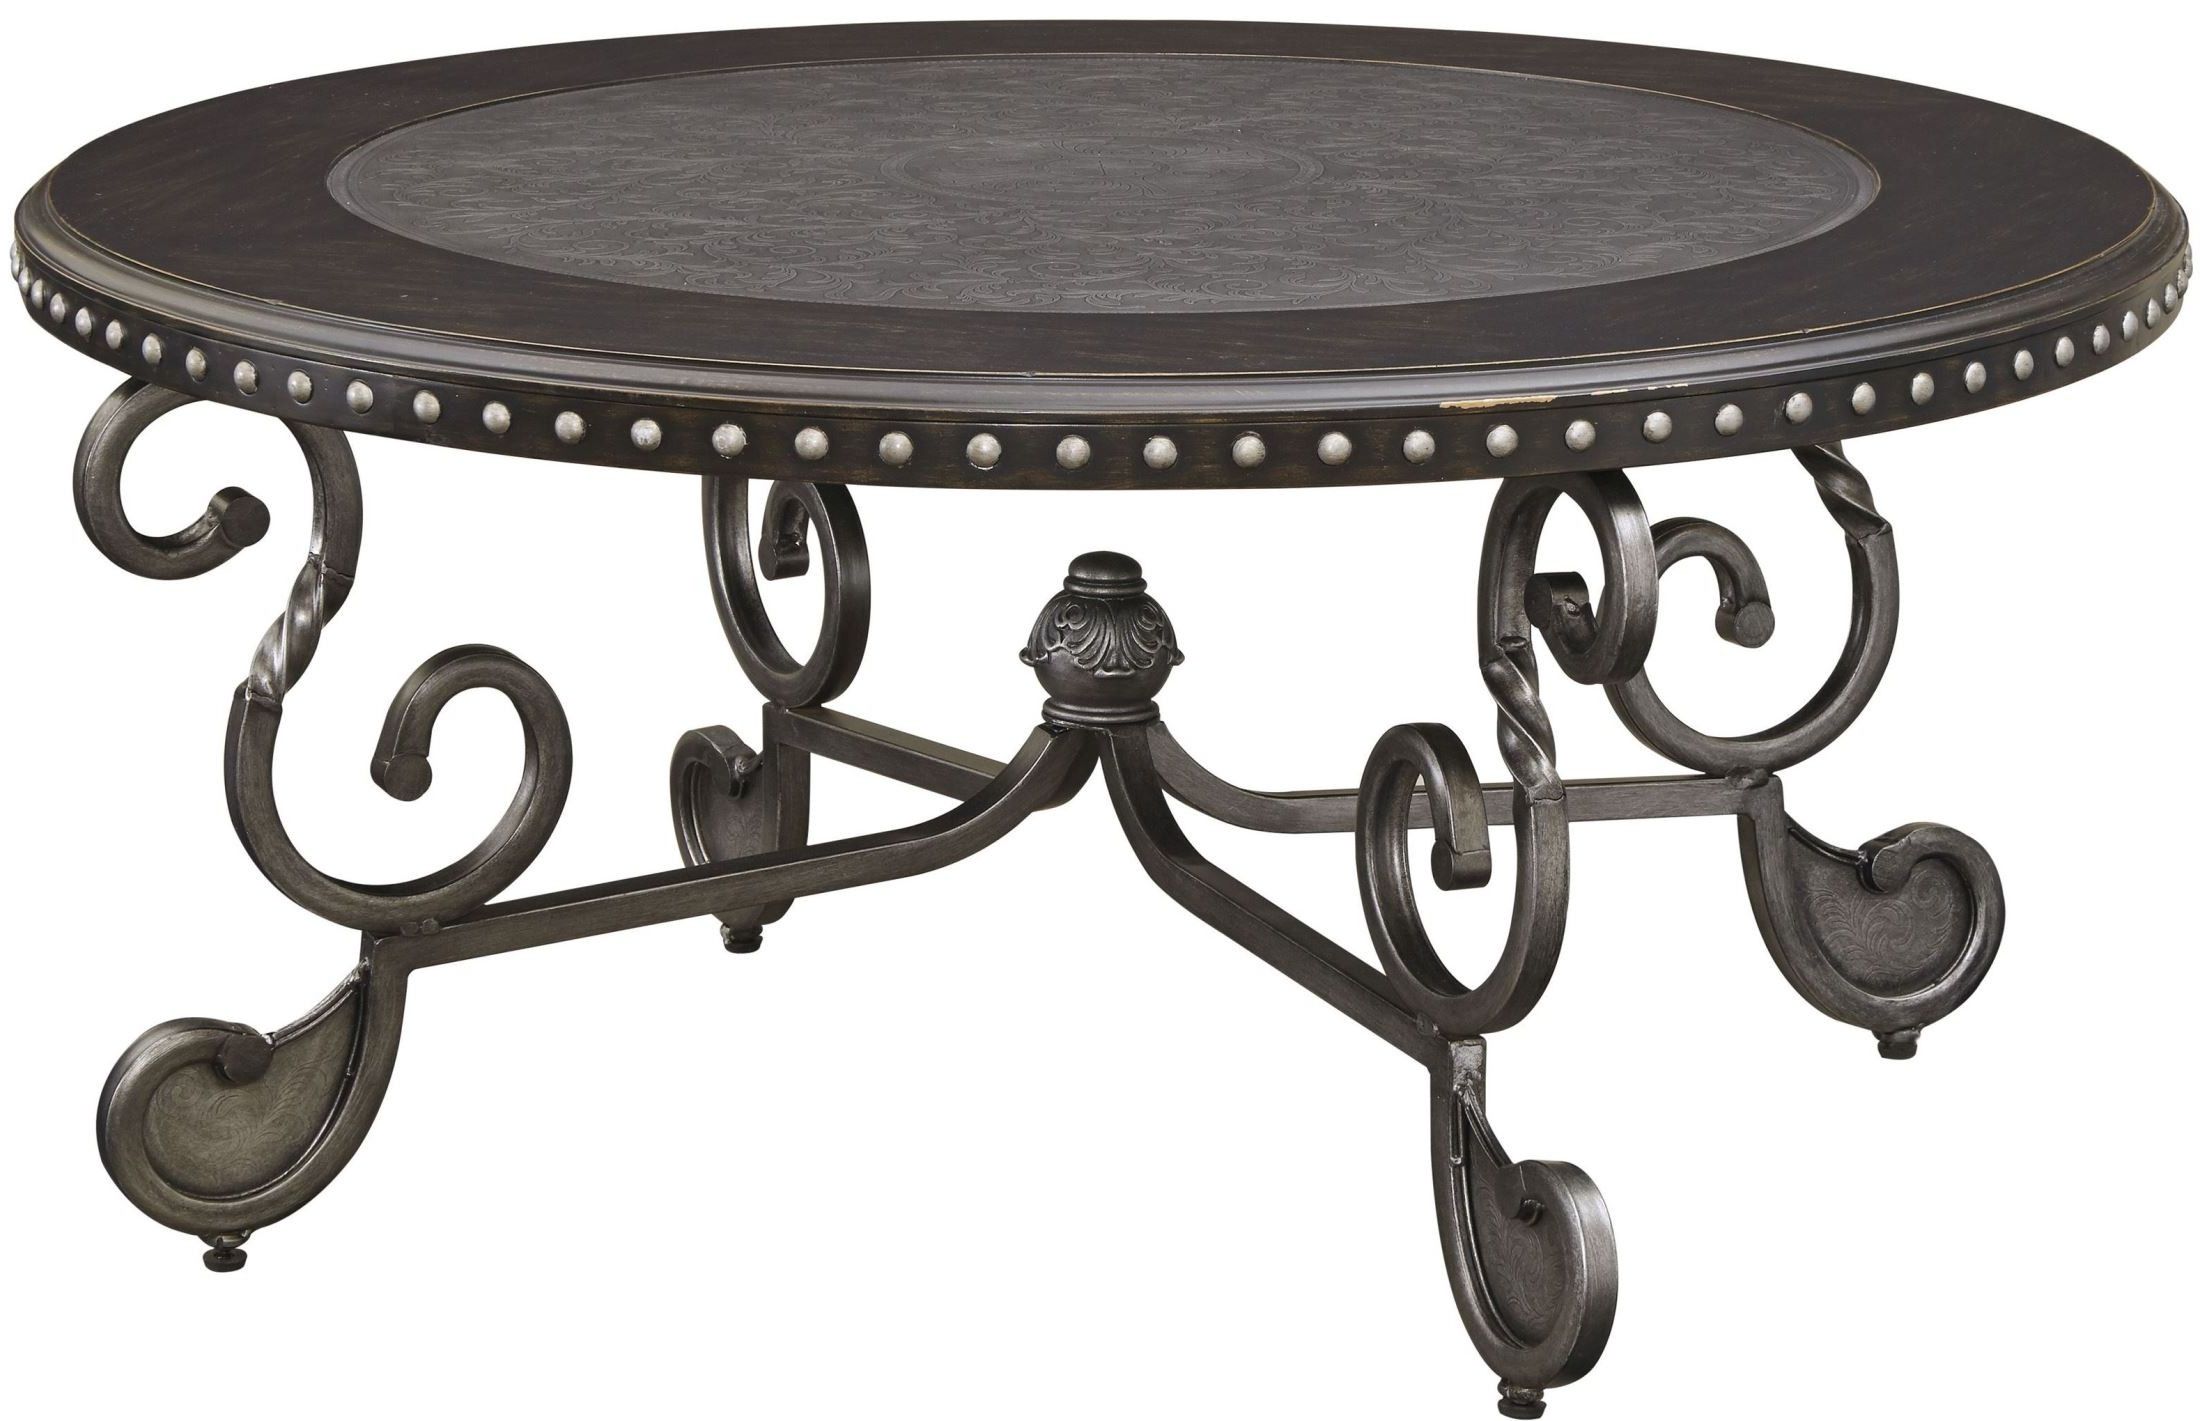 2020 Jonidell Black Round Cocktail Table From Ashley (t582 8) (View 5 of 10)